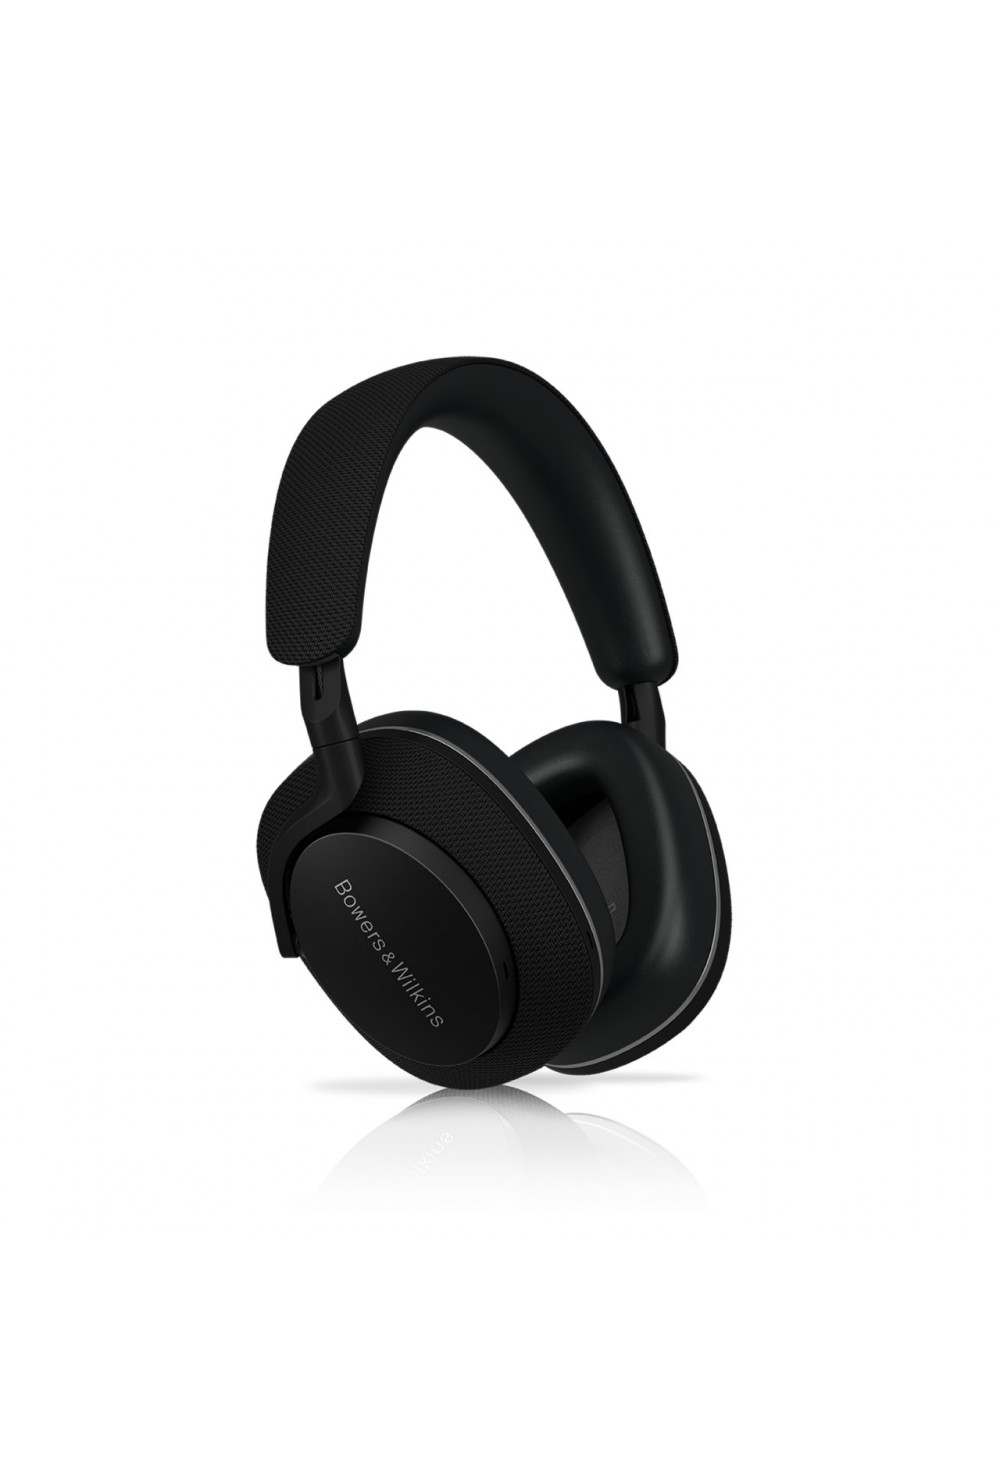 Bowers & Wilkins PX 7 S2e Anthracite Black